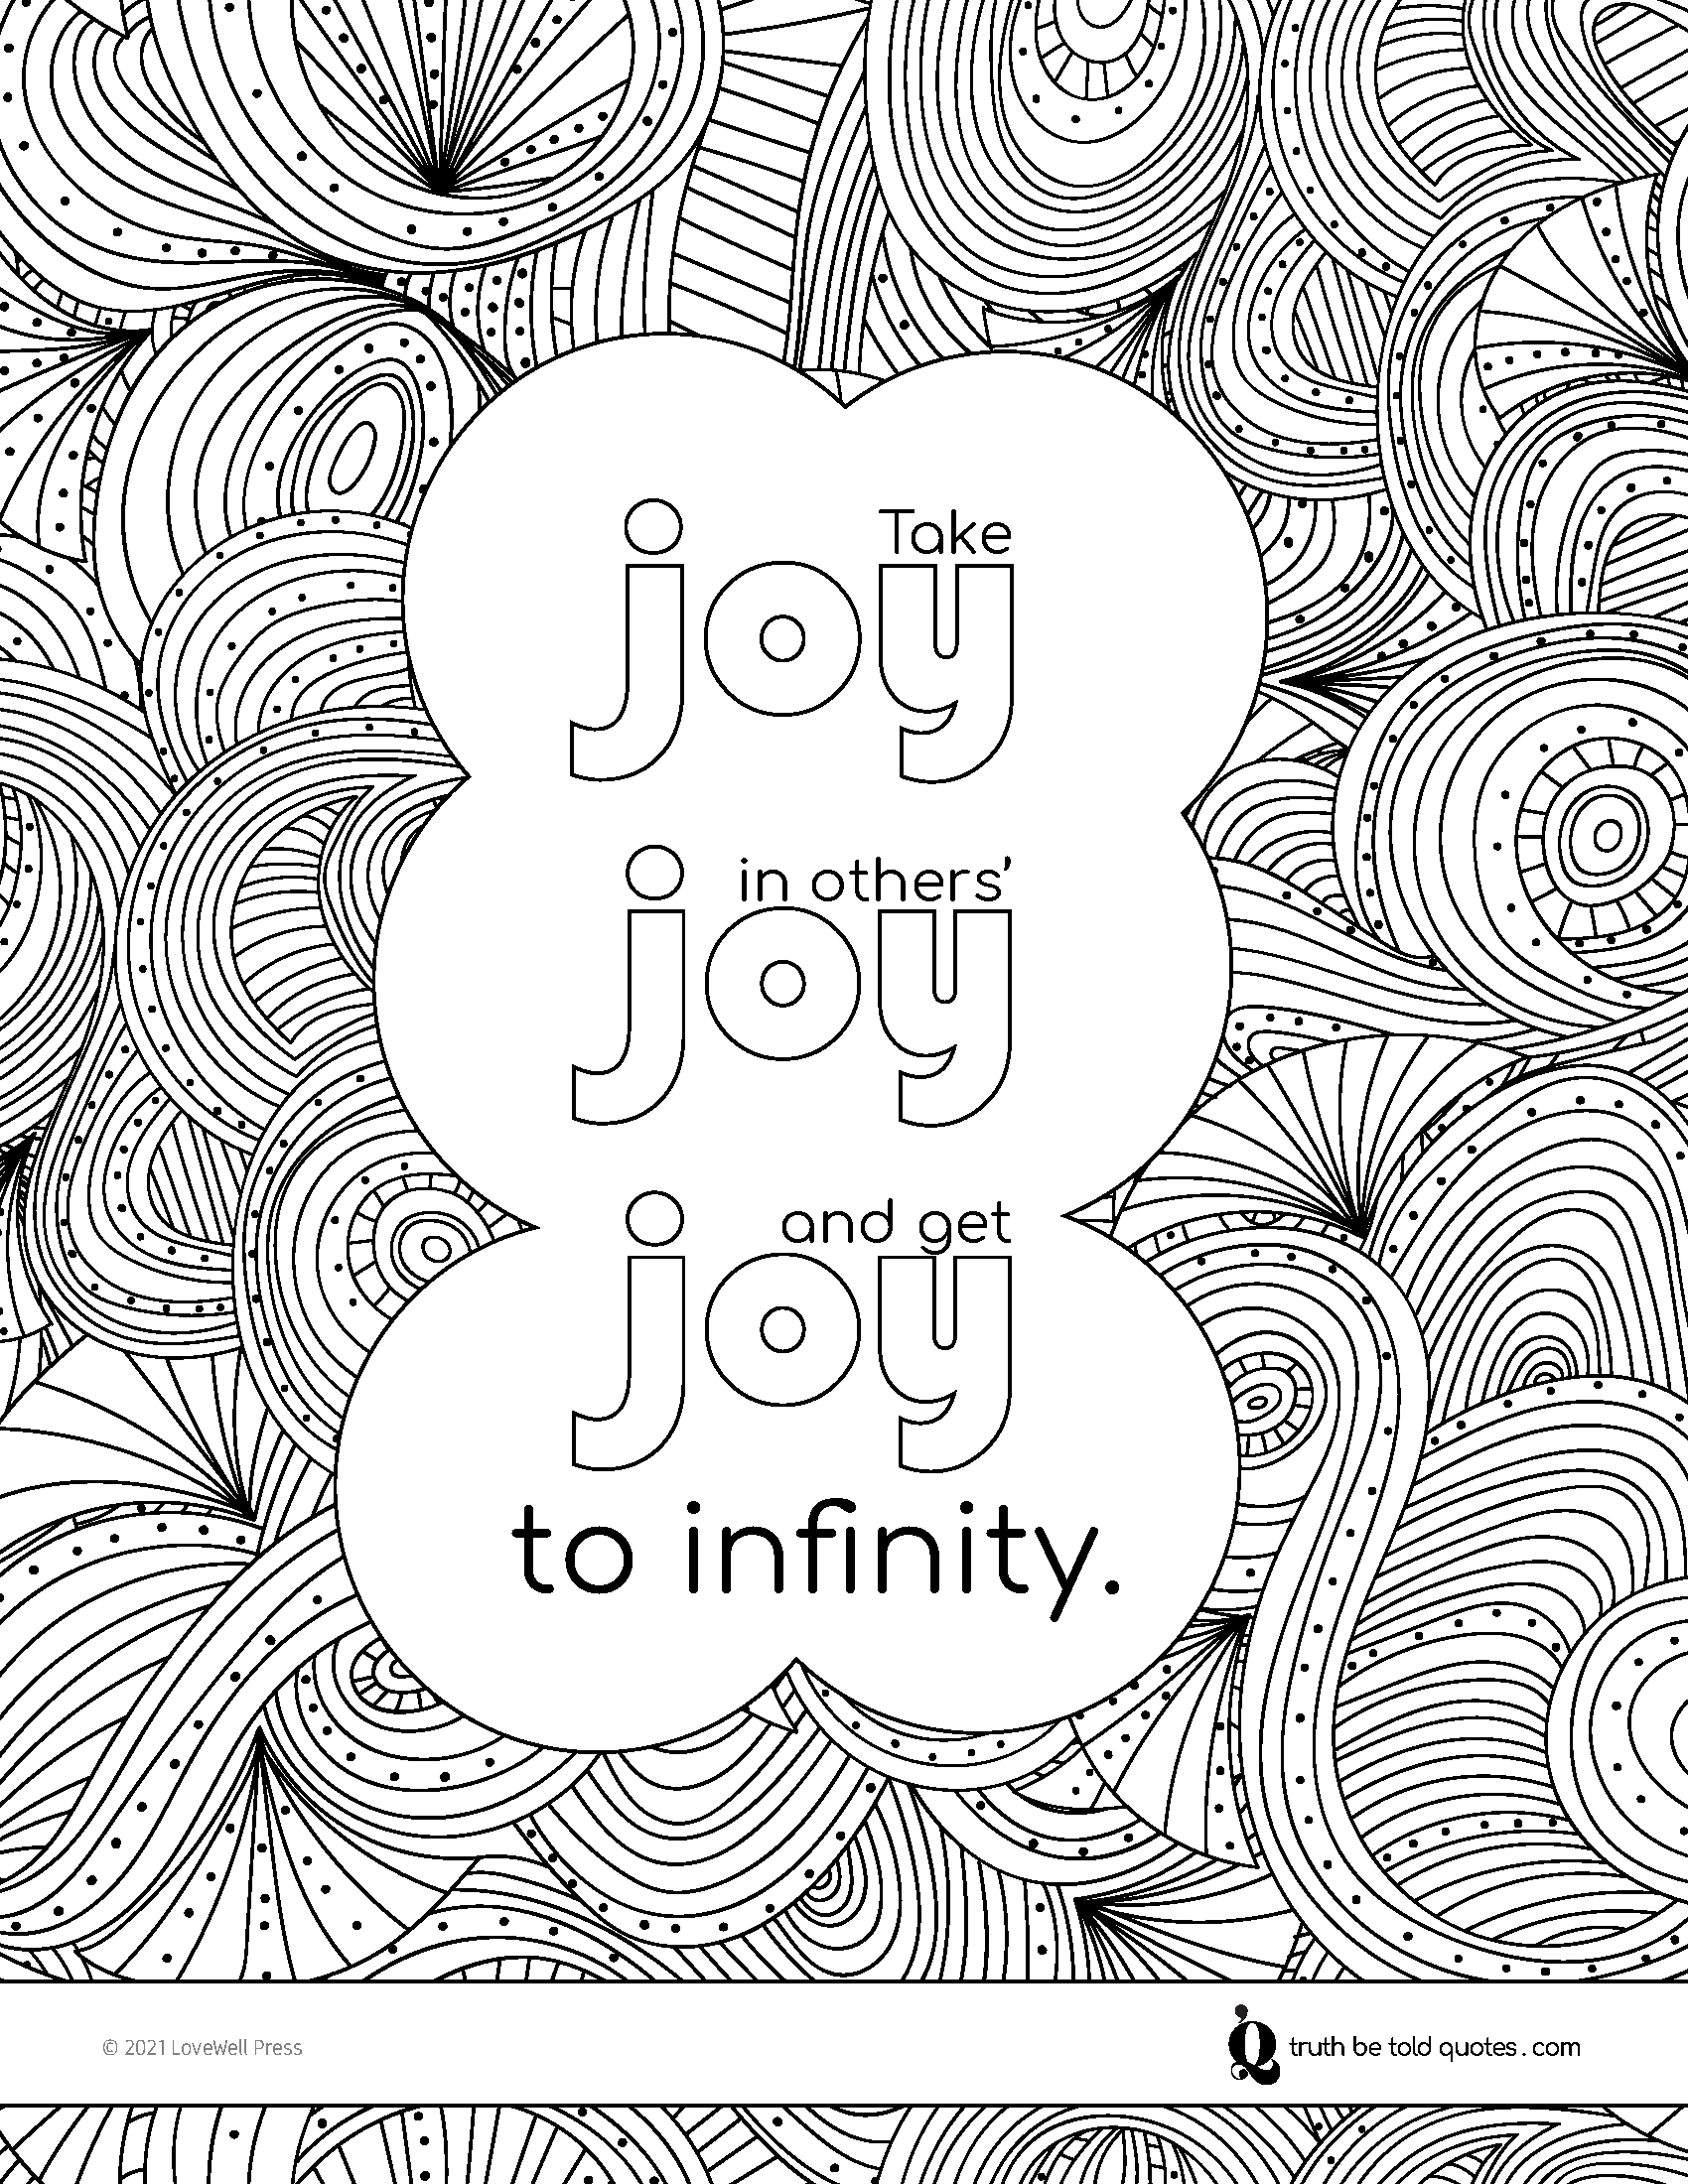 Free mindfulness coloring page with quote about joy and happiness with image of zentangle style circles